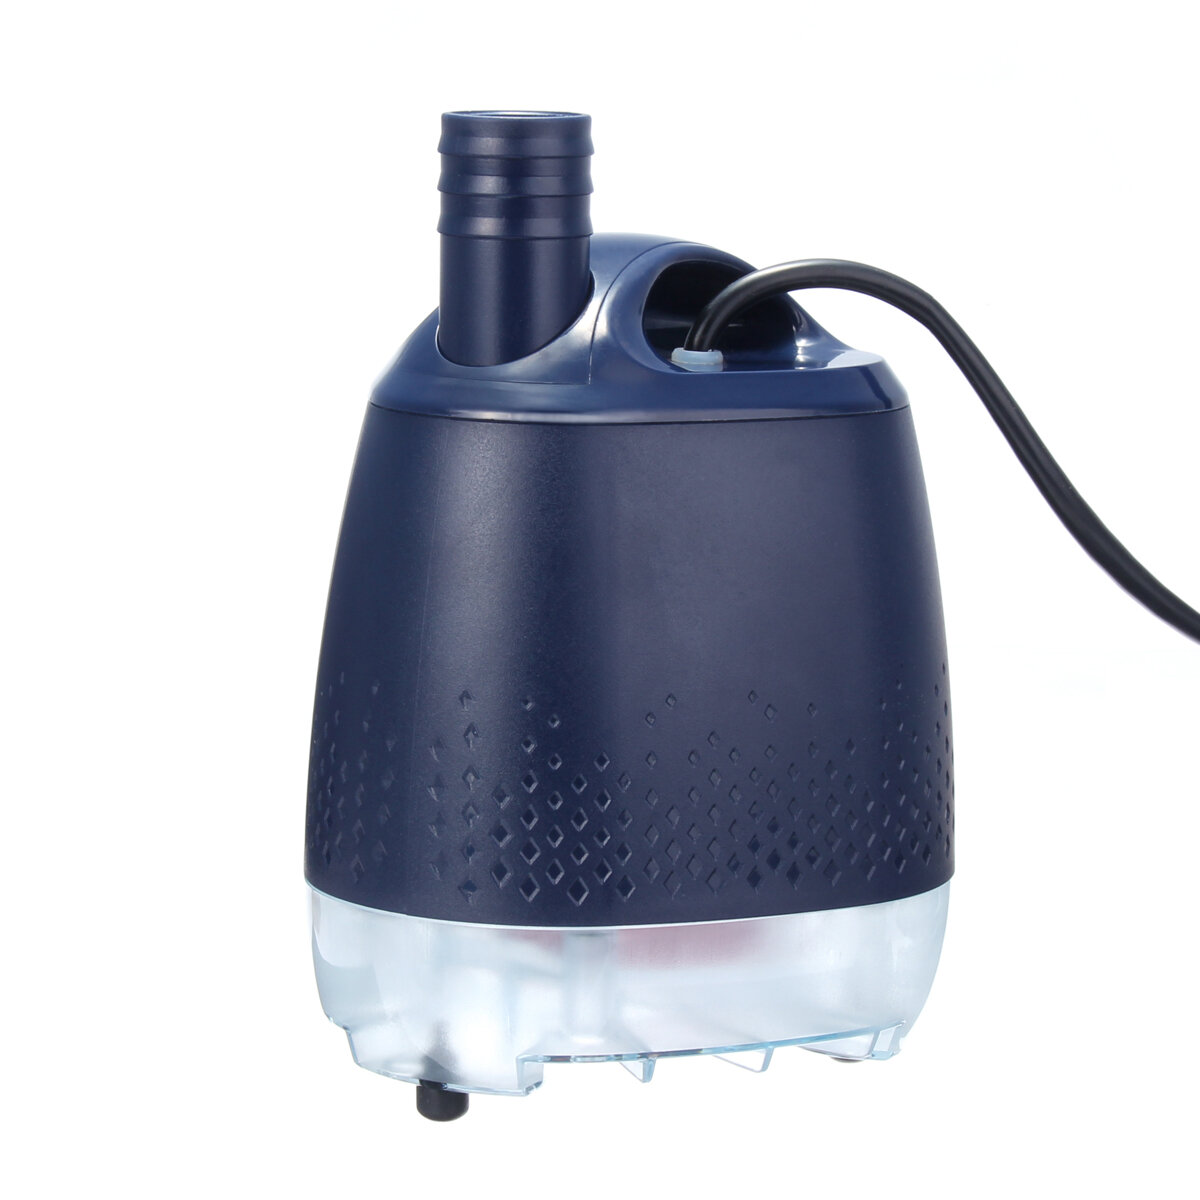 Image of DC24V Submersible Pump Fountain Water Pump Power Cord 2 Nozzles Bottom Suction Pump US